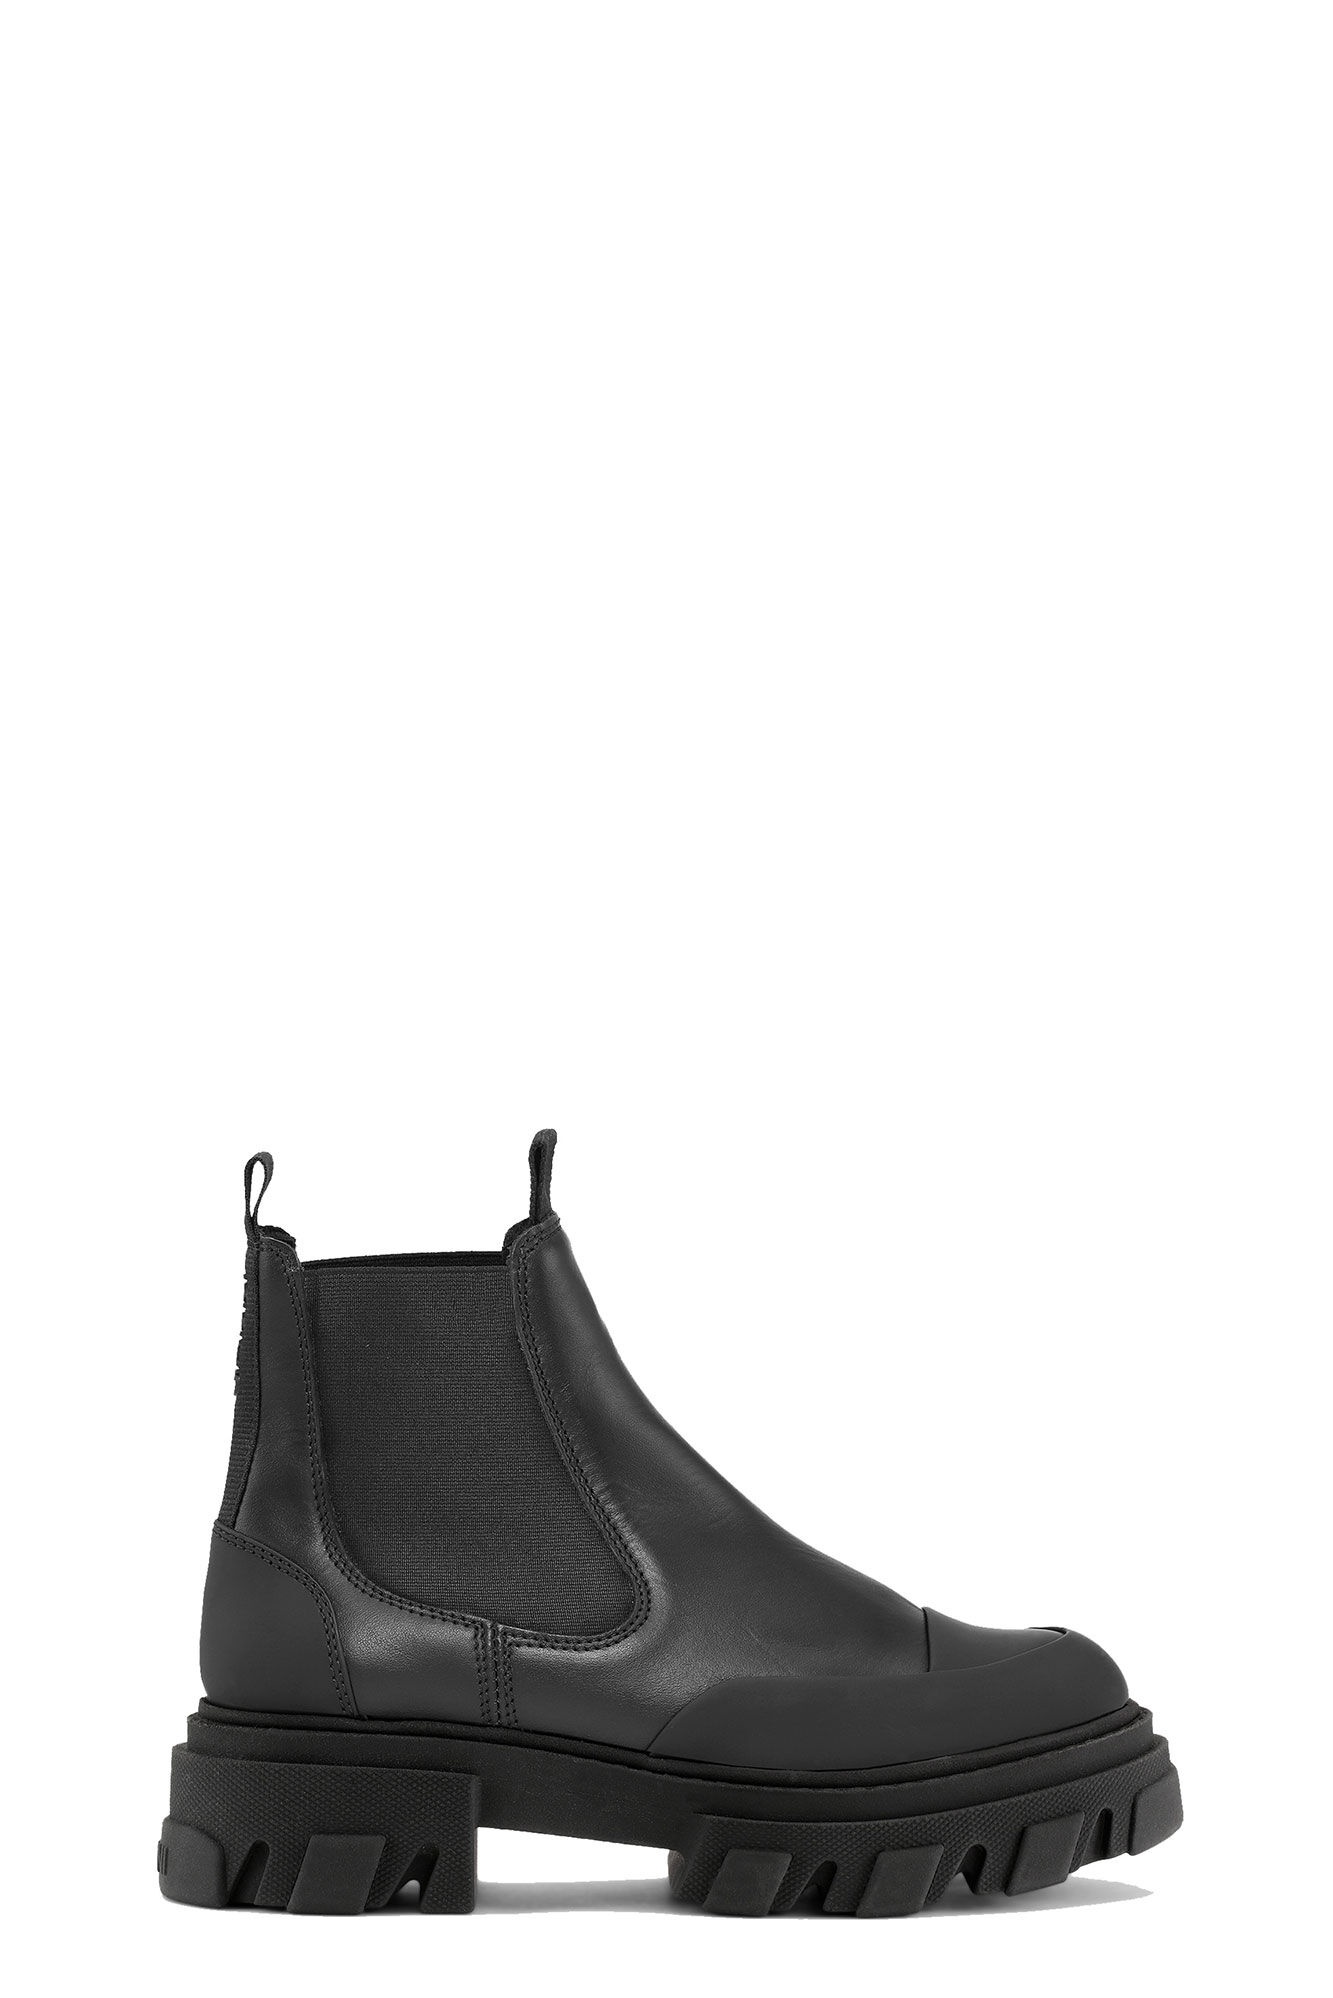 BLACK STITCH CLEATED LOW CHELSEA BOOTS - 1